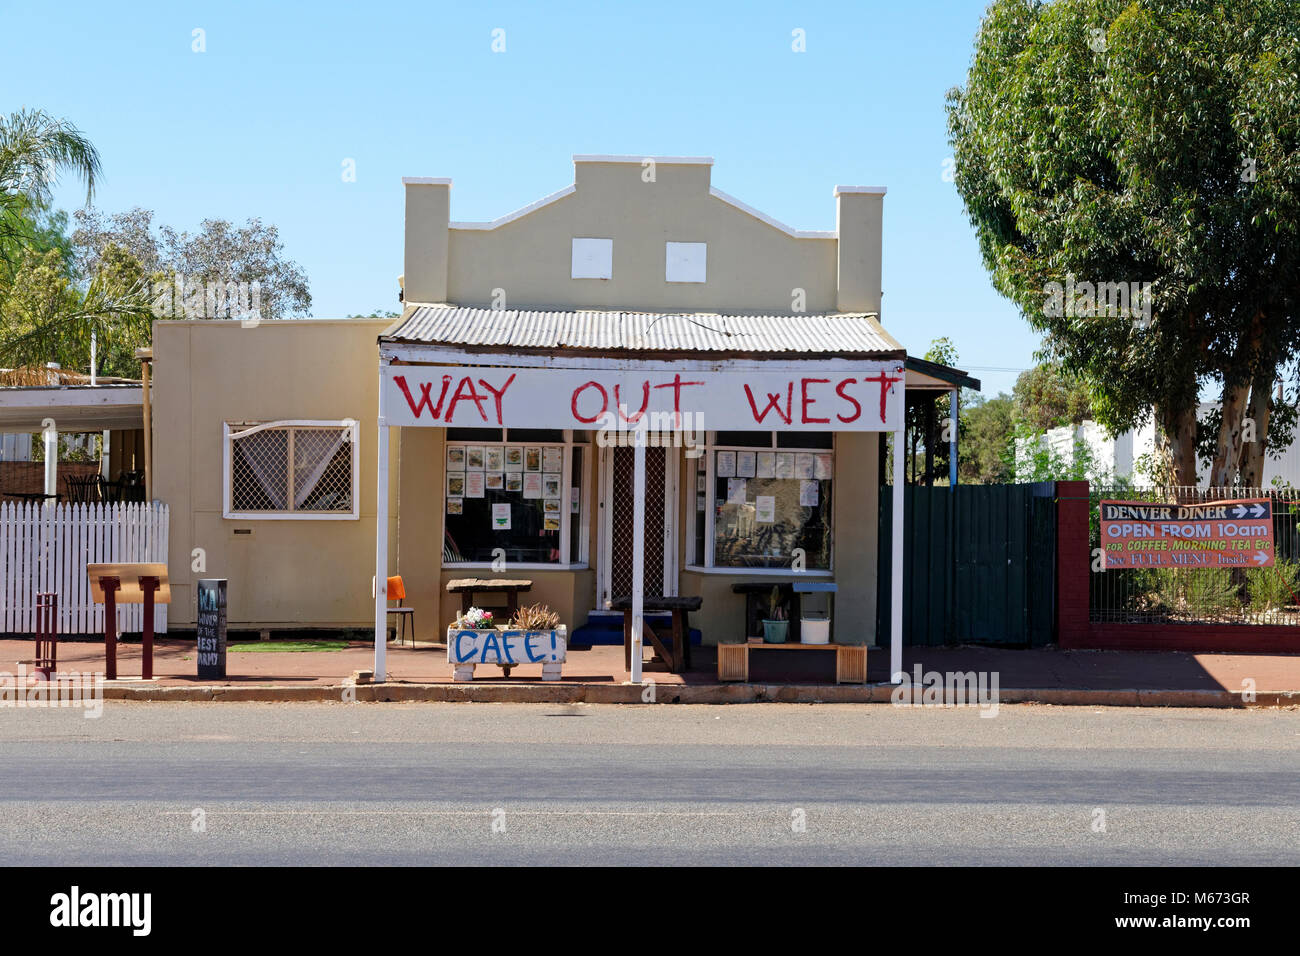 Goldfields cafe (way out west), Coolgardie, Western Australia. Stock Photo